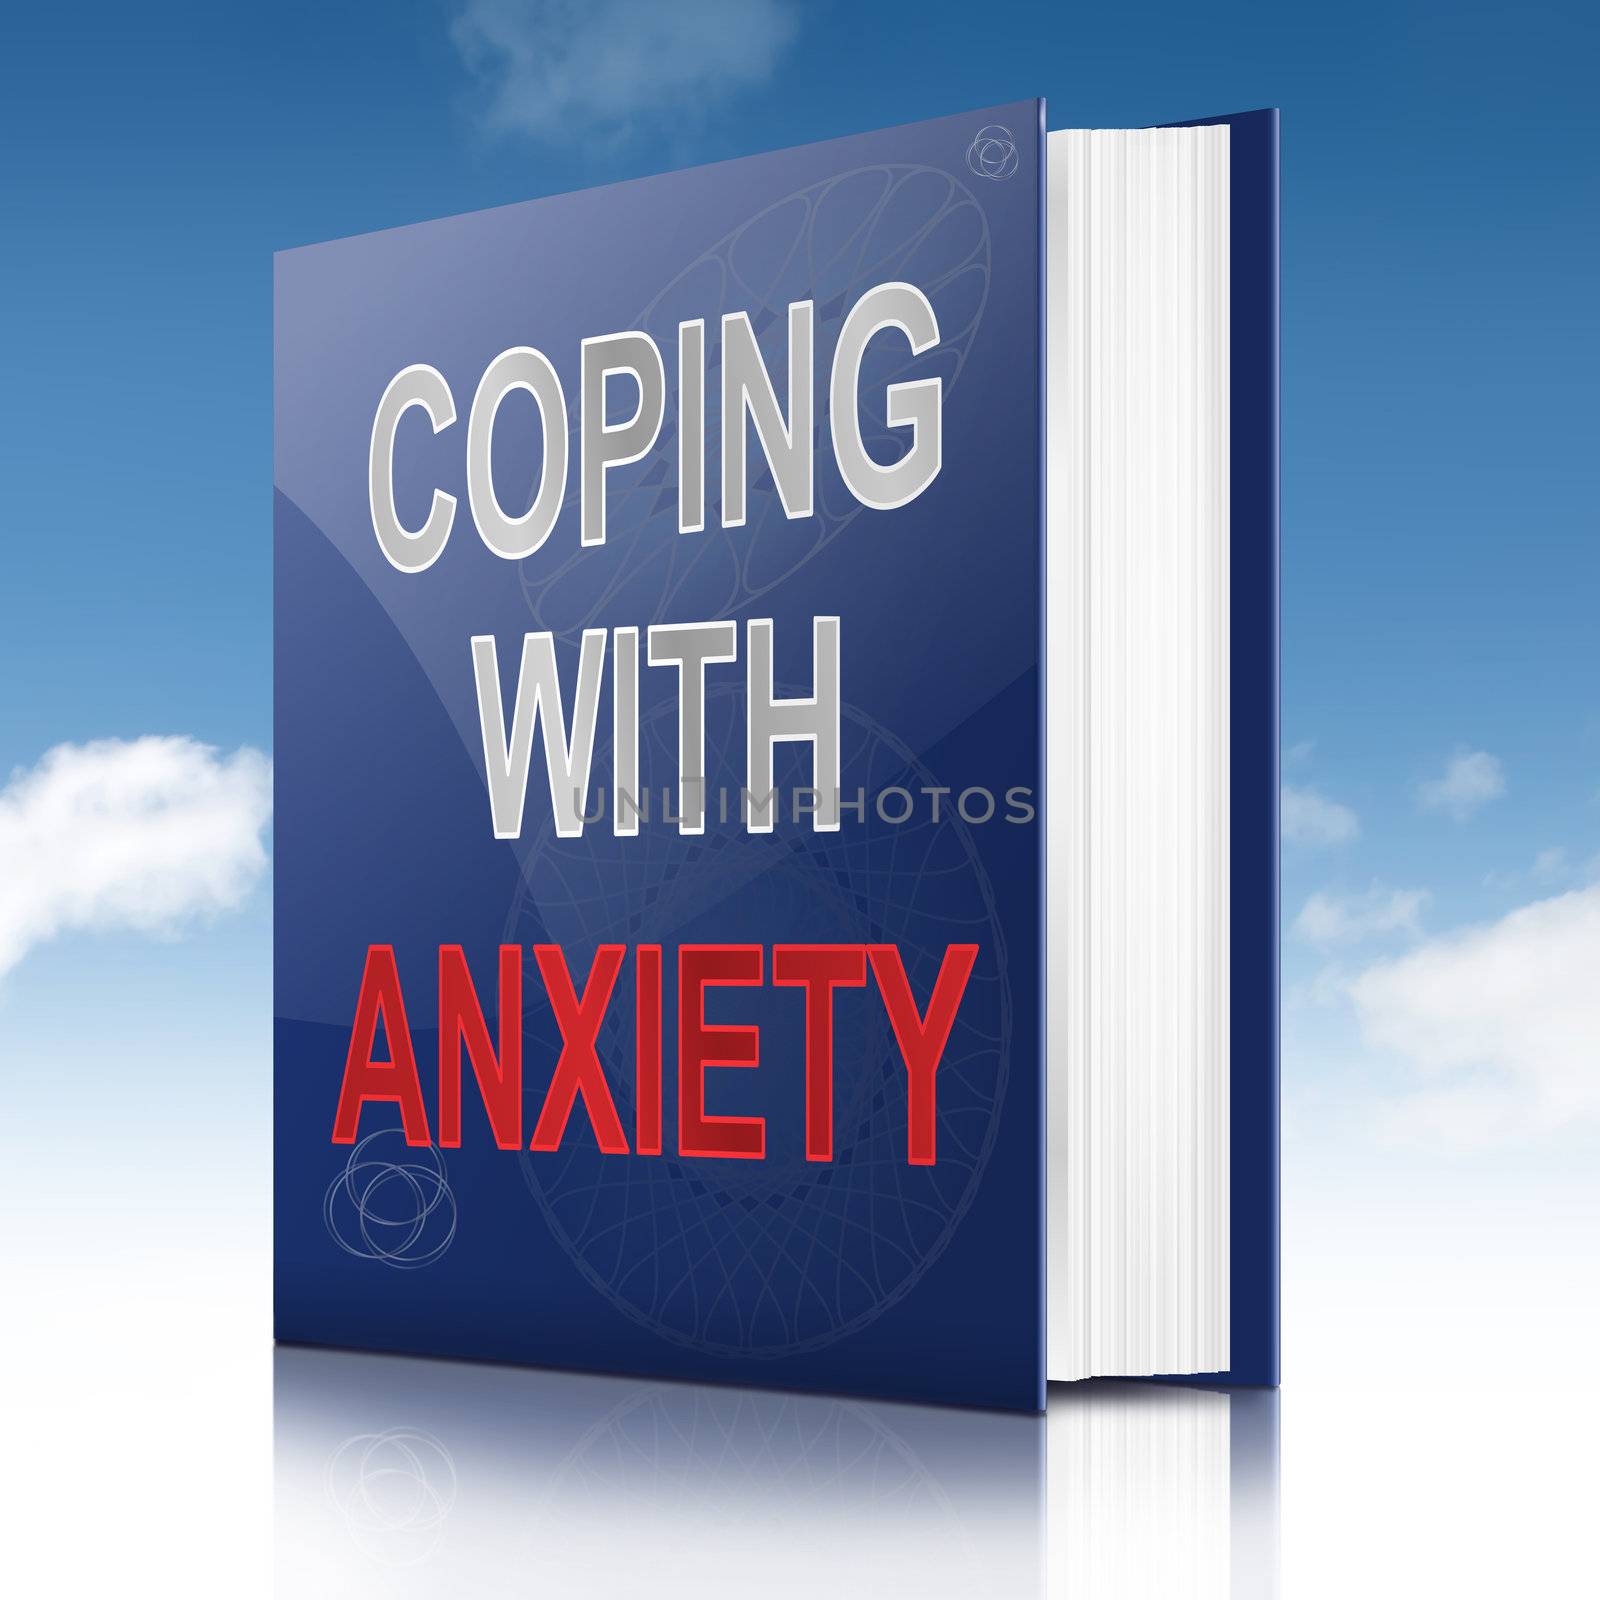 Illustration depicting a book with an anxiety concept title. Sky background.